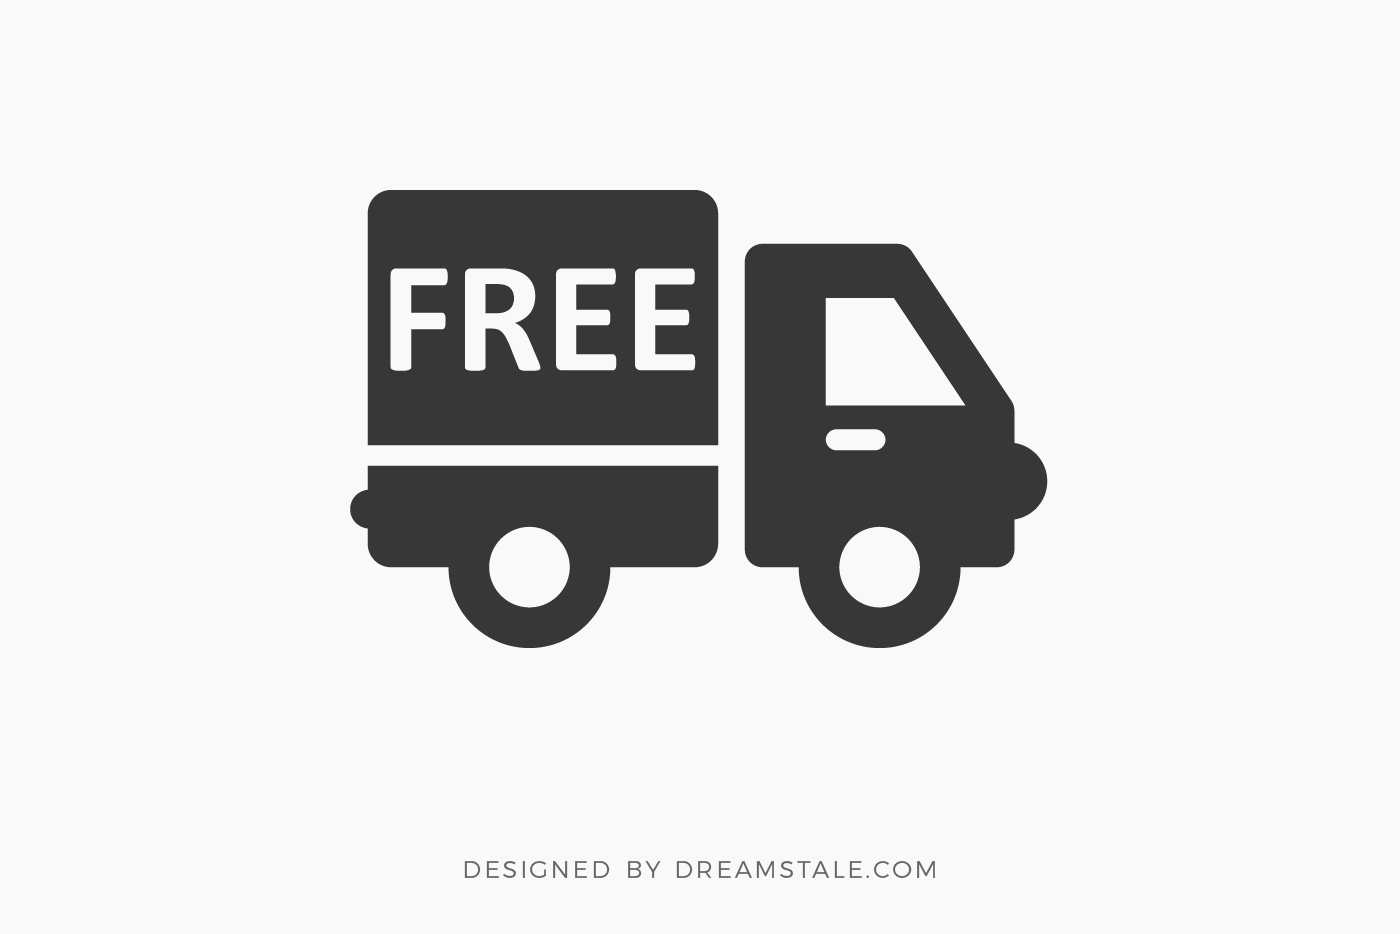 Download Shipping & Delivery Truck Free SVG Clipart - Dreamstale